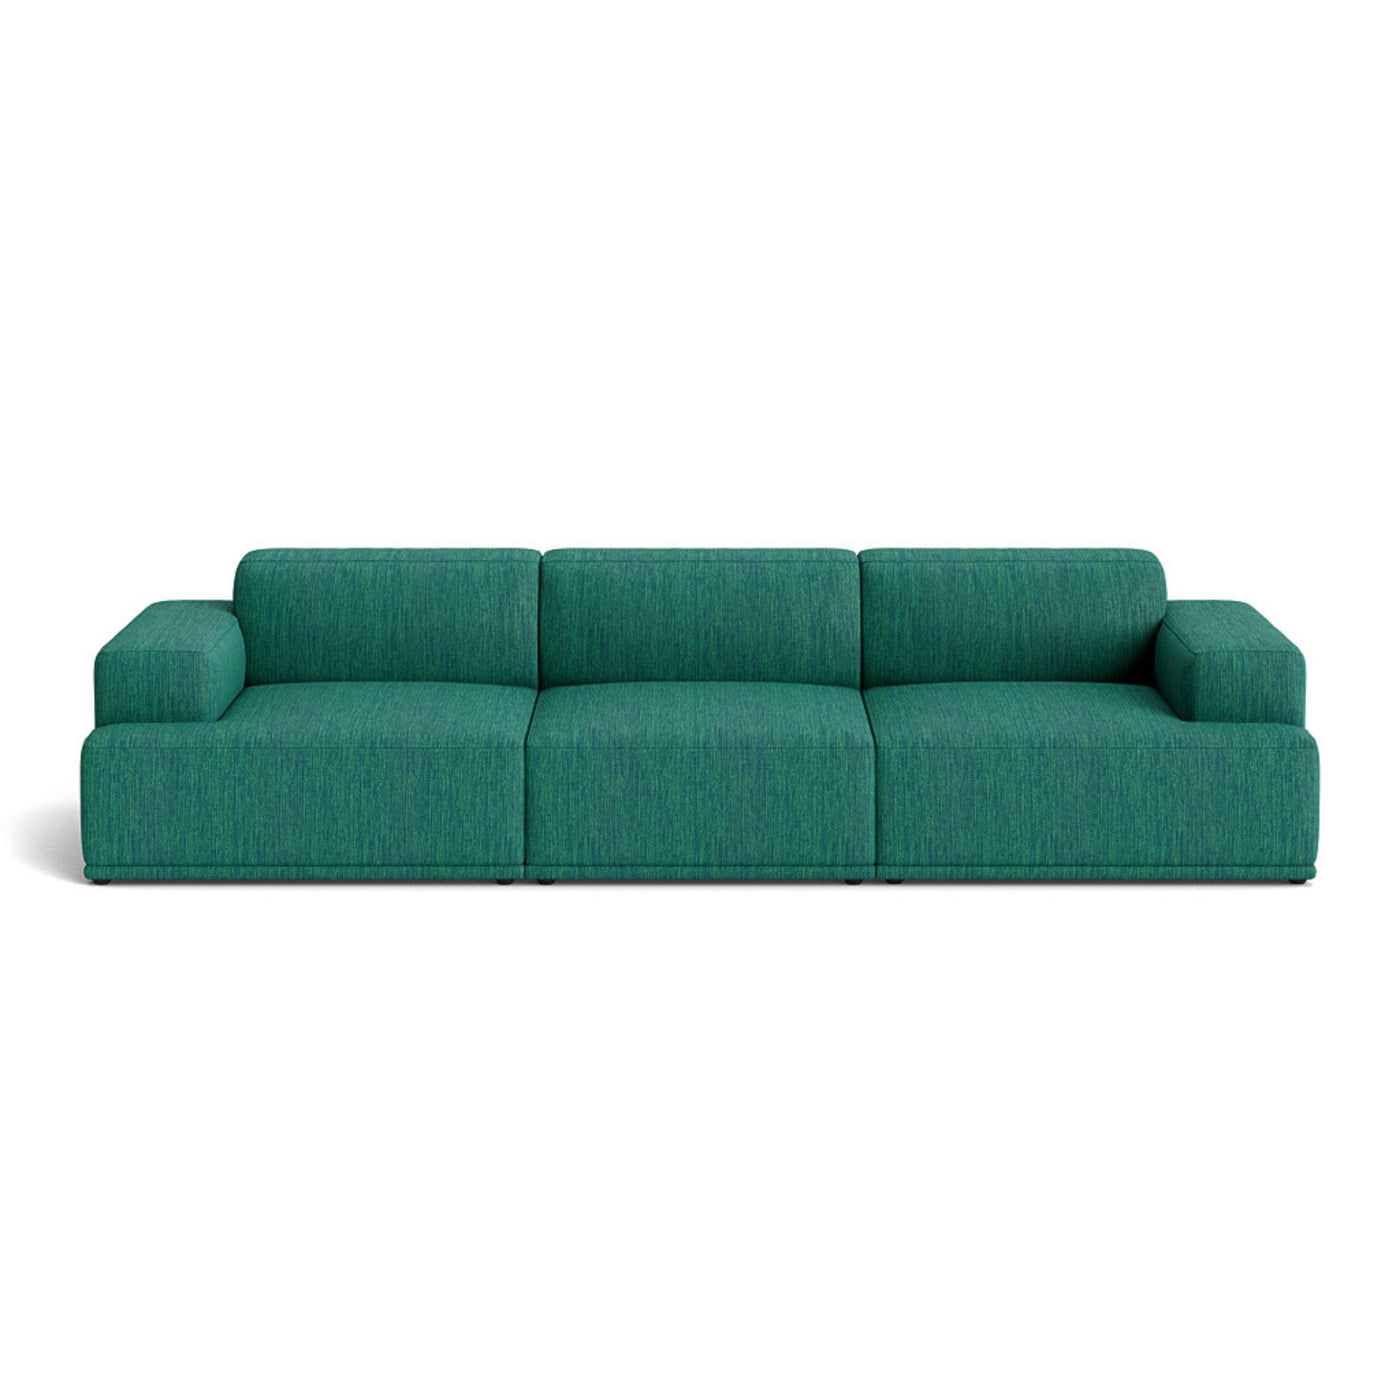 Muuto Connect Soft Modular 3 Seater Sofa, configuration 1. Made-to-order from someday designs. #colour_balder-862